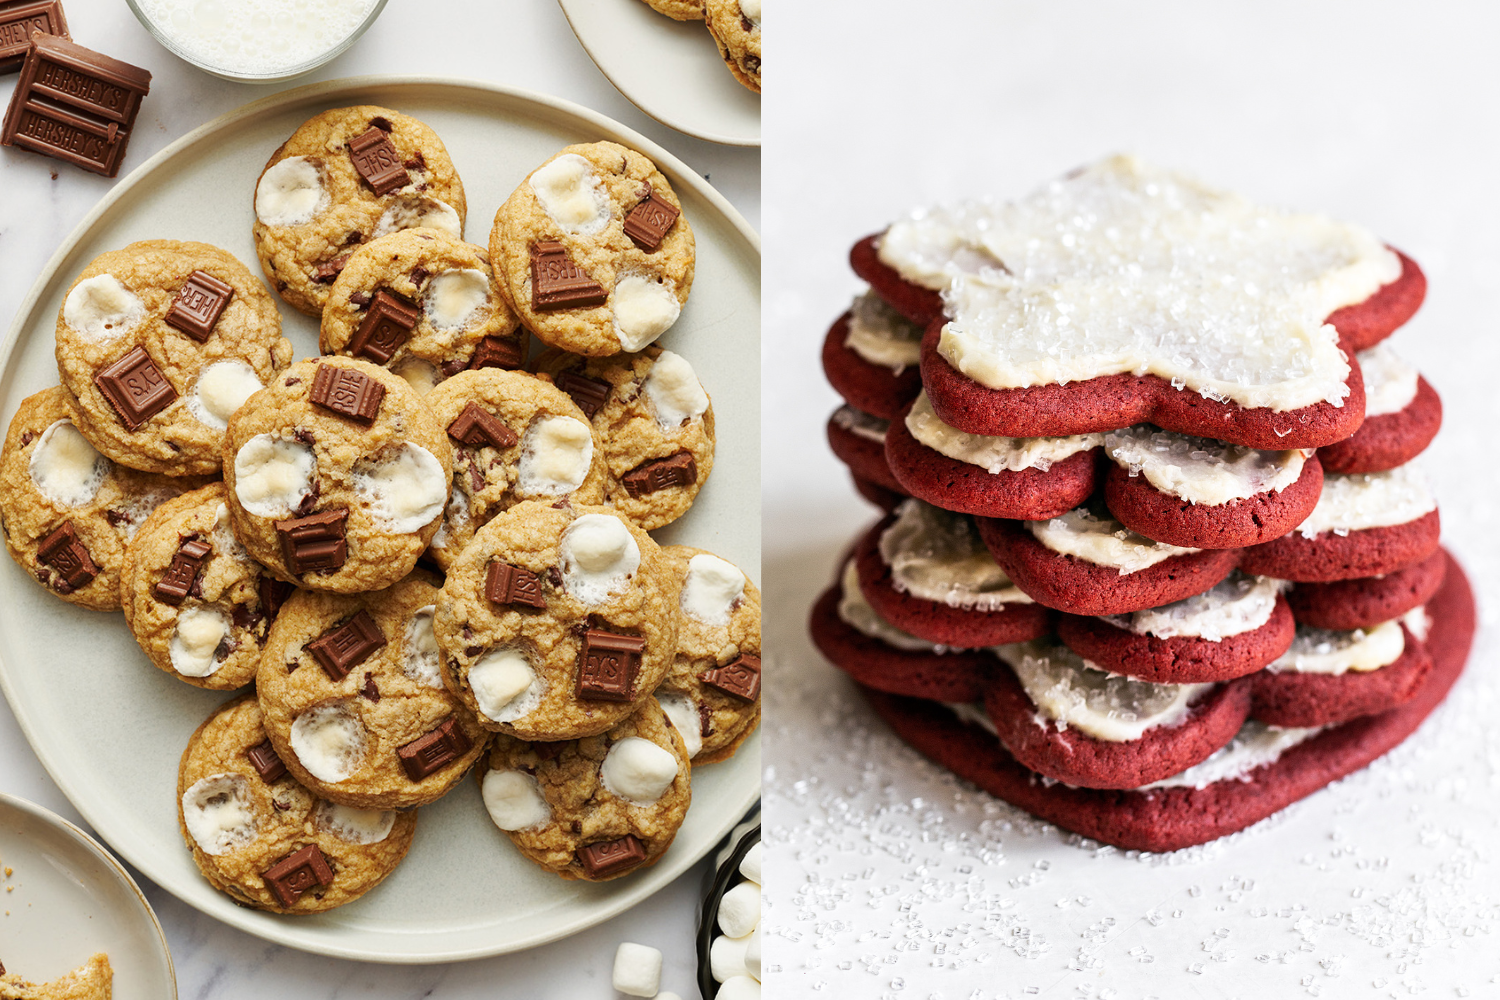 s'mores cookies on a plate, next to a stack of star-shaped red velvet cookies with cream cheese frosting.